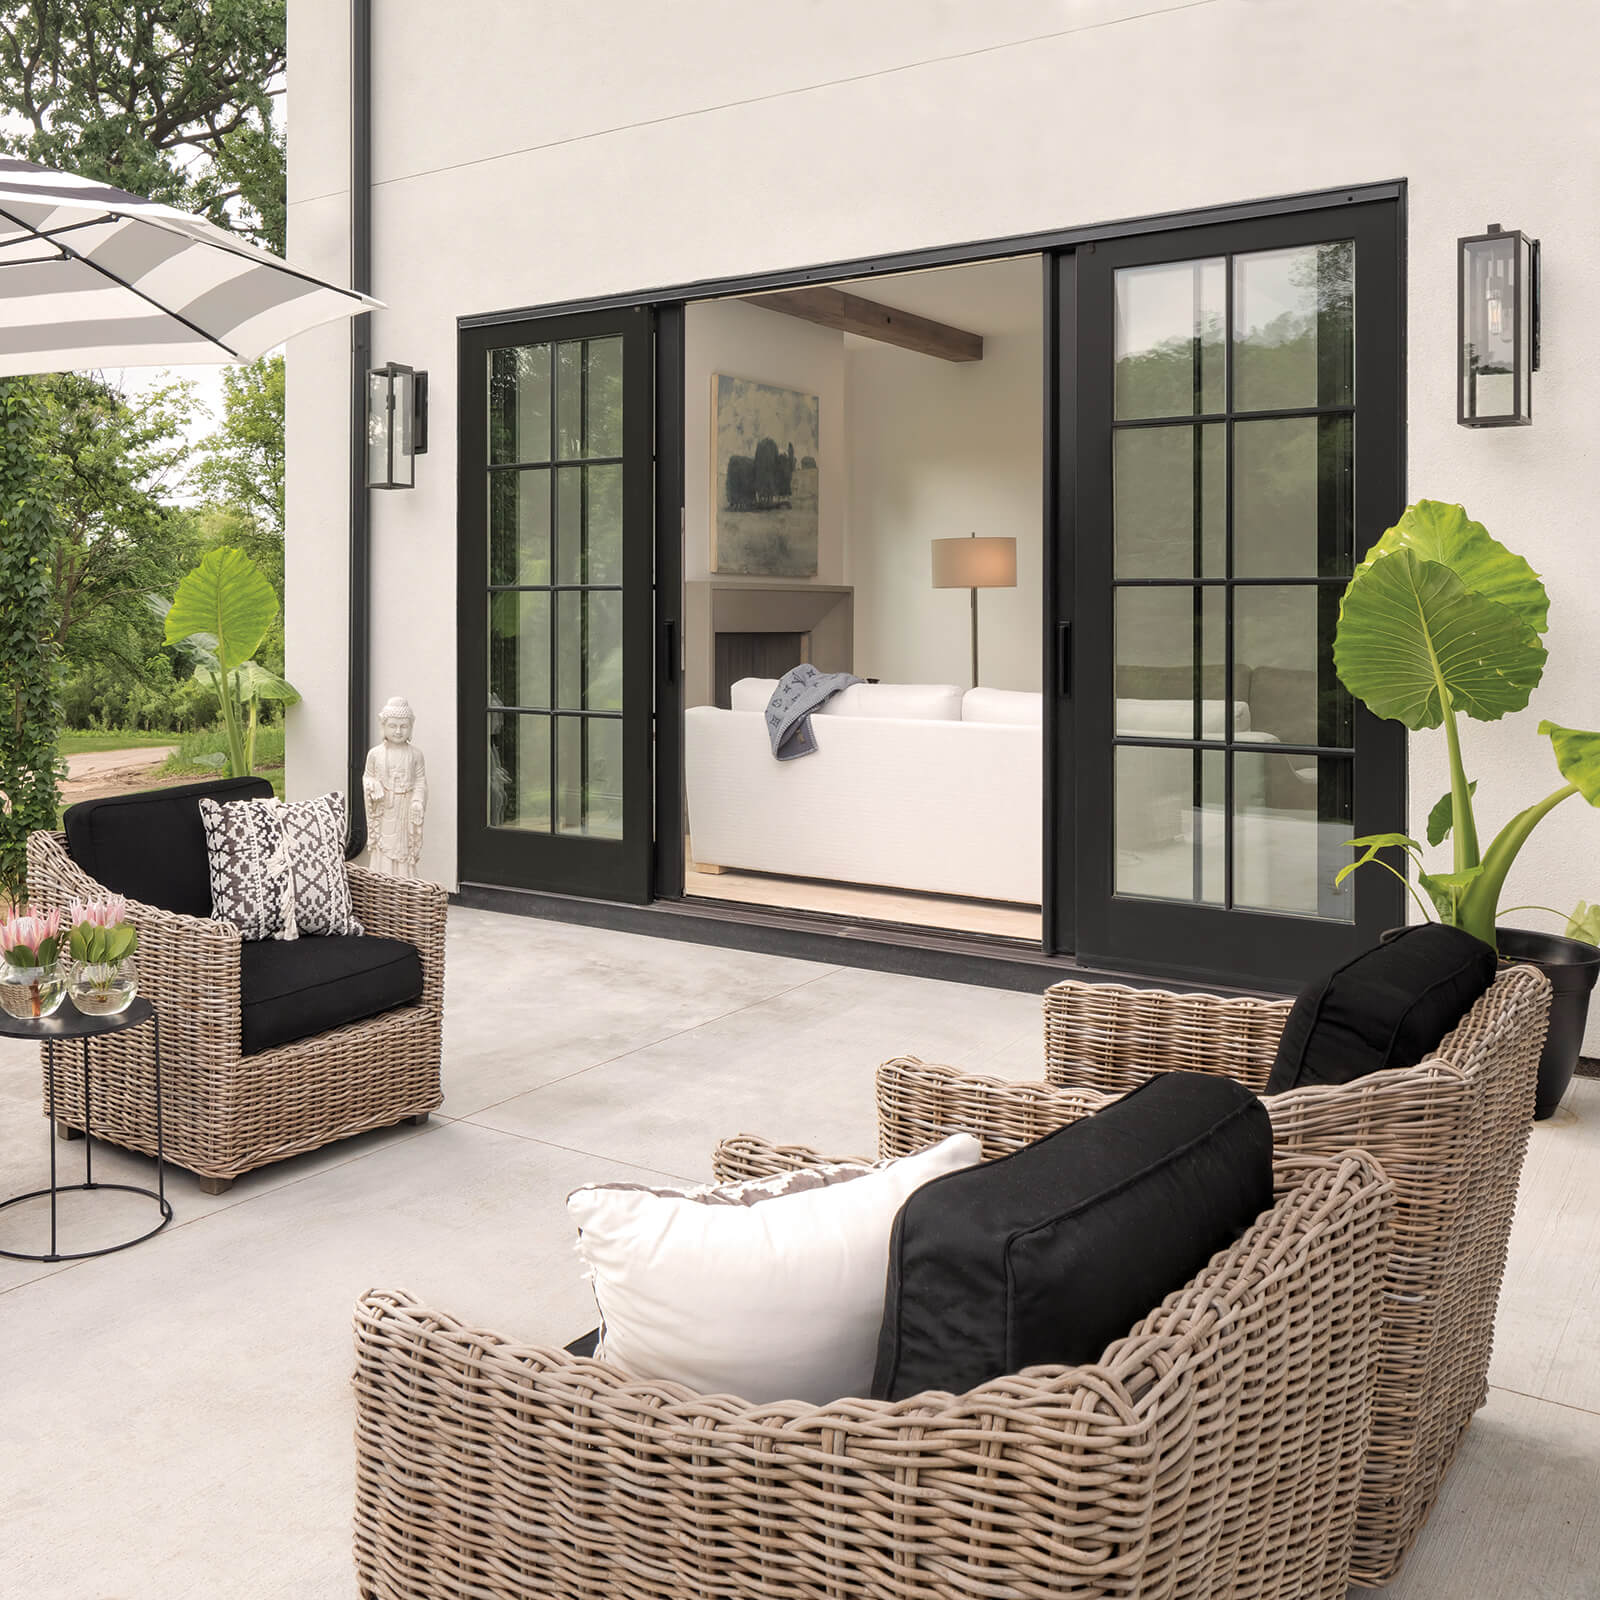 Patio entertainment area with open Marvin Signature Ultimate Sliding French Door